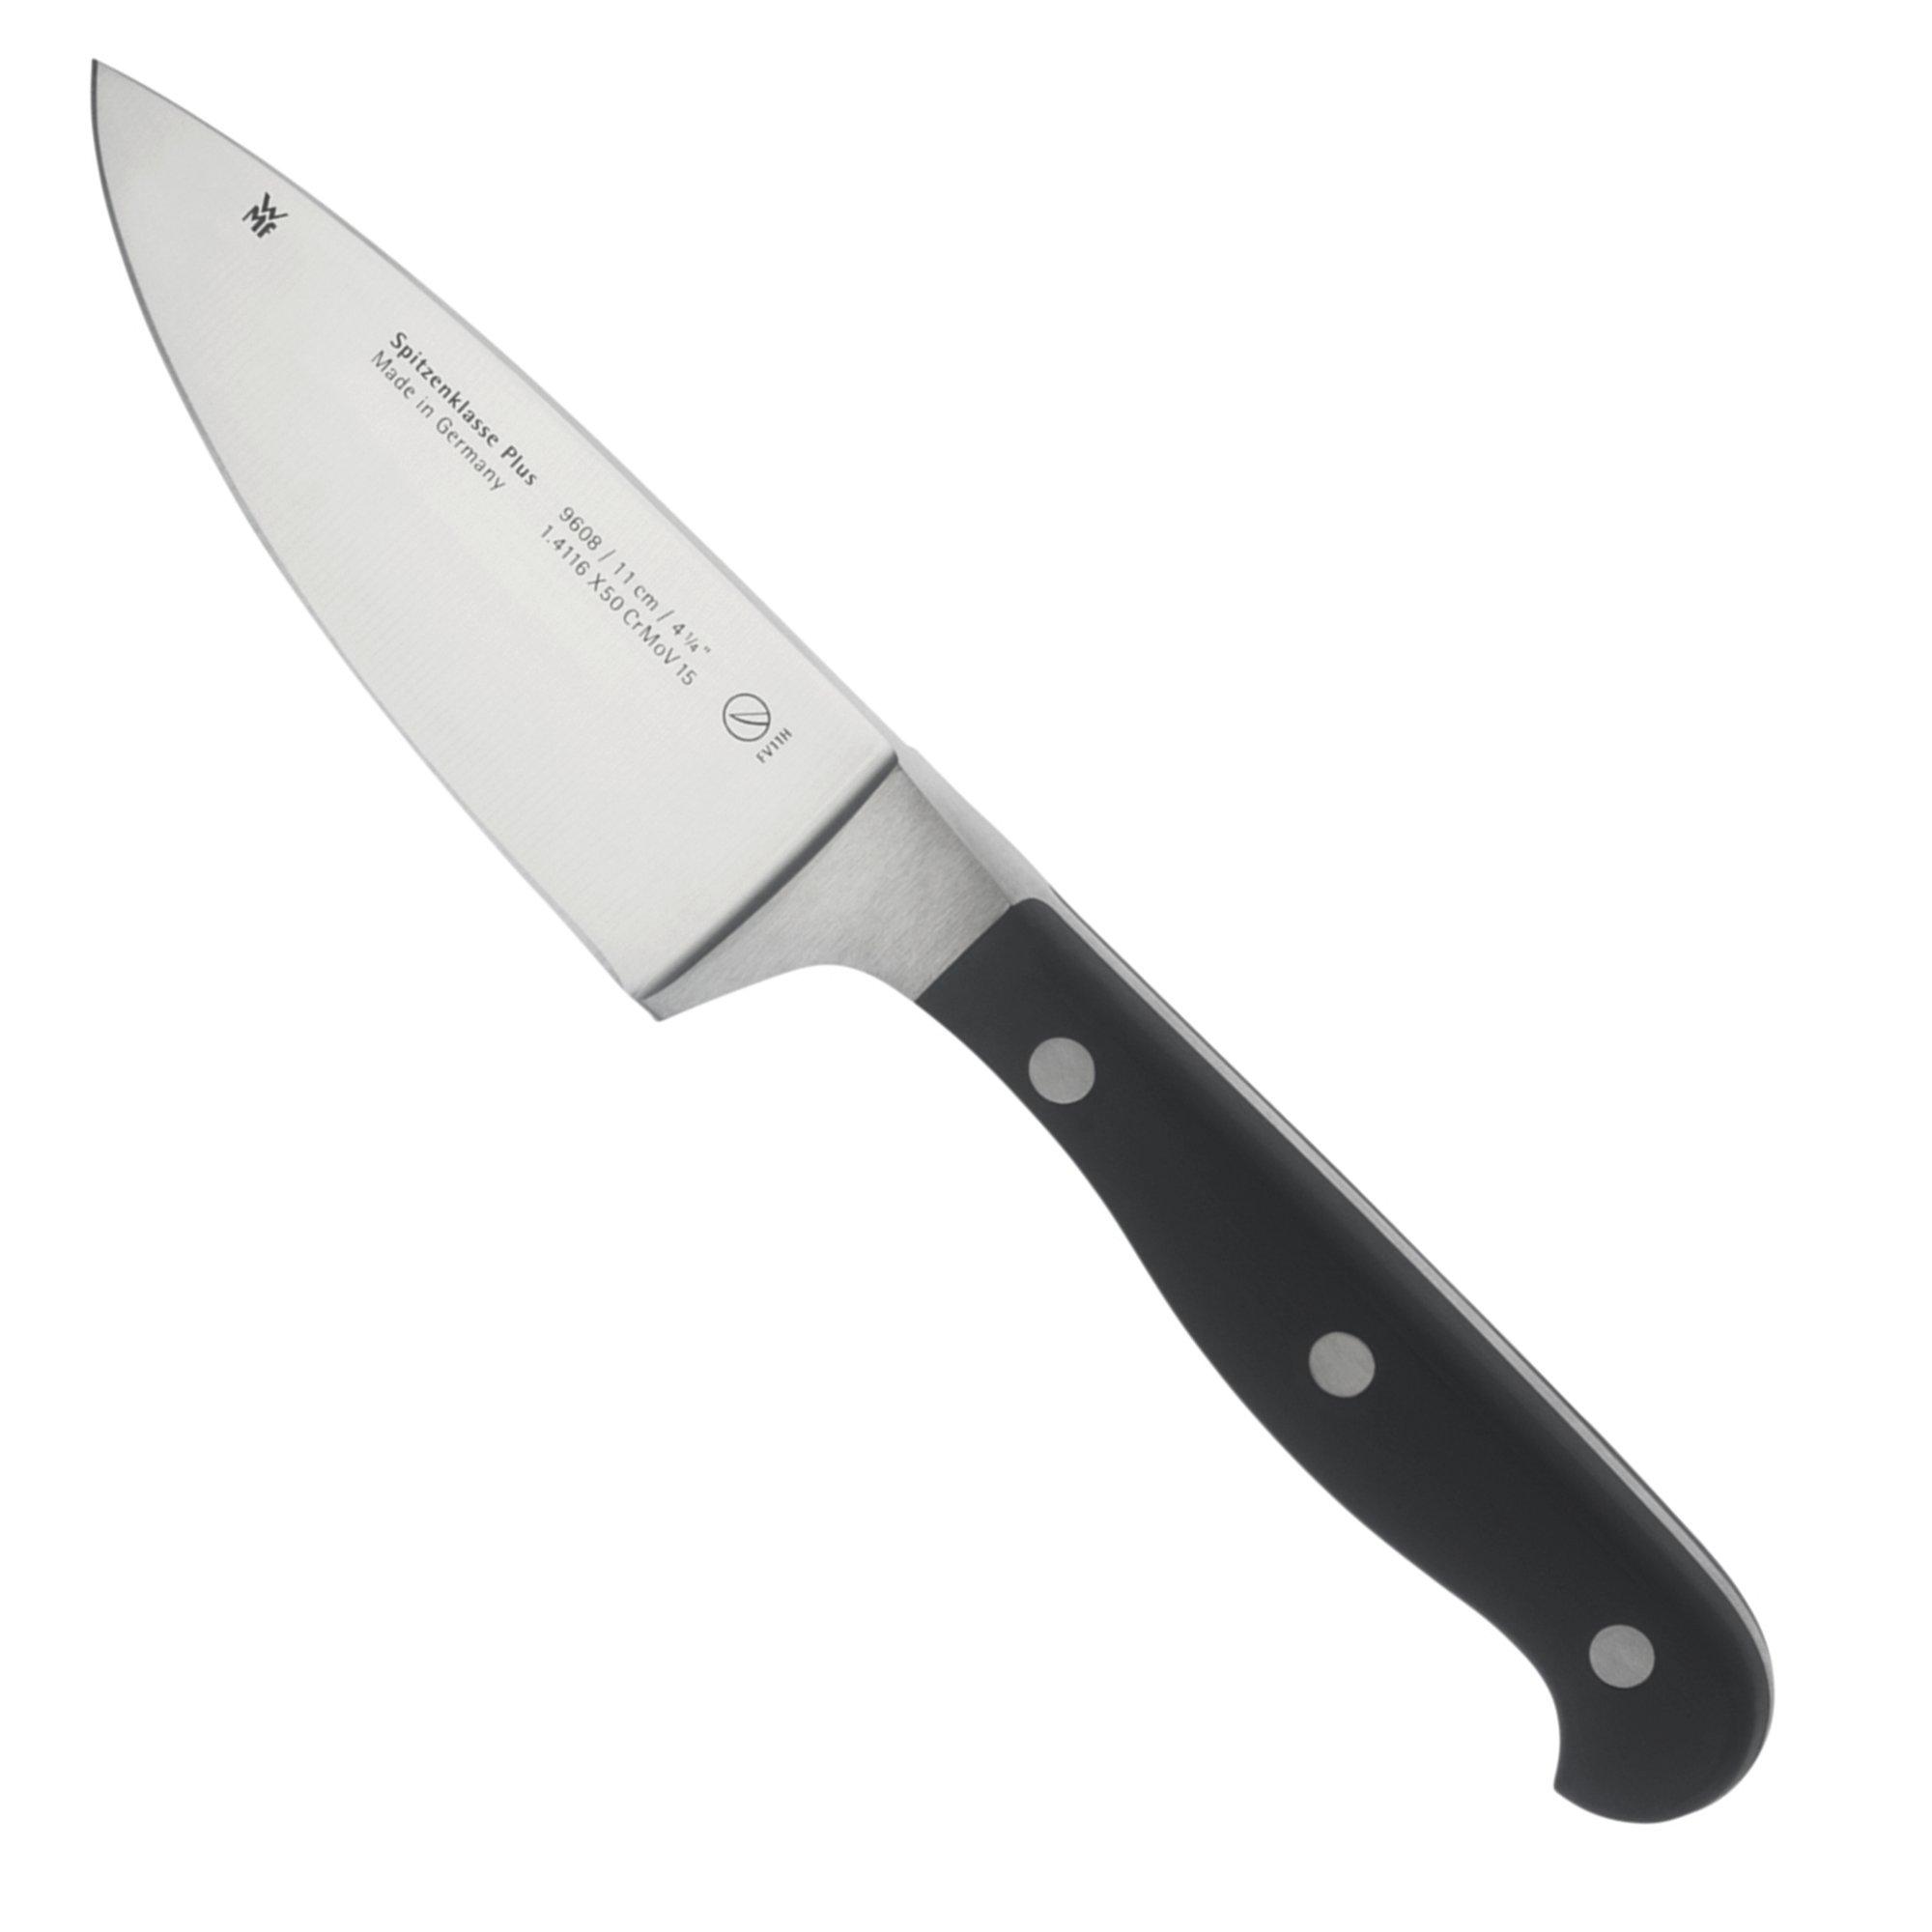 WMF Spitzenklasse Plus 1896086032 cheese and herb knife, 11 cm